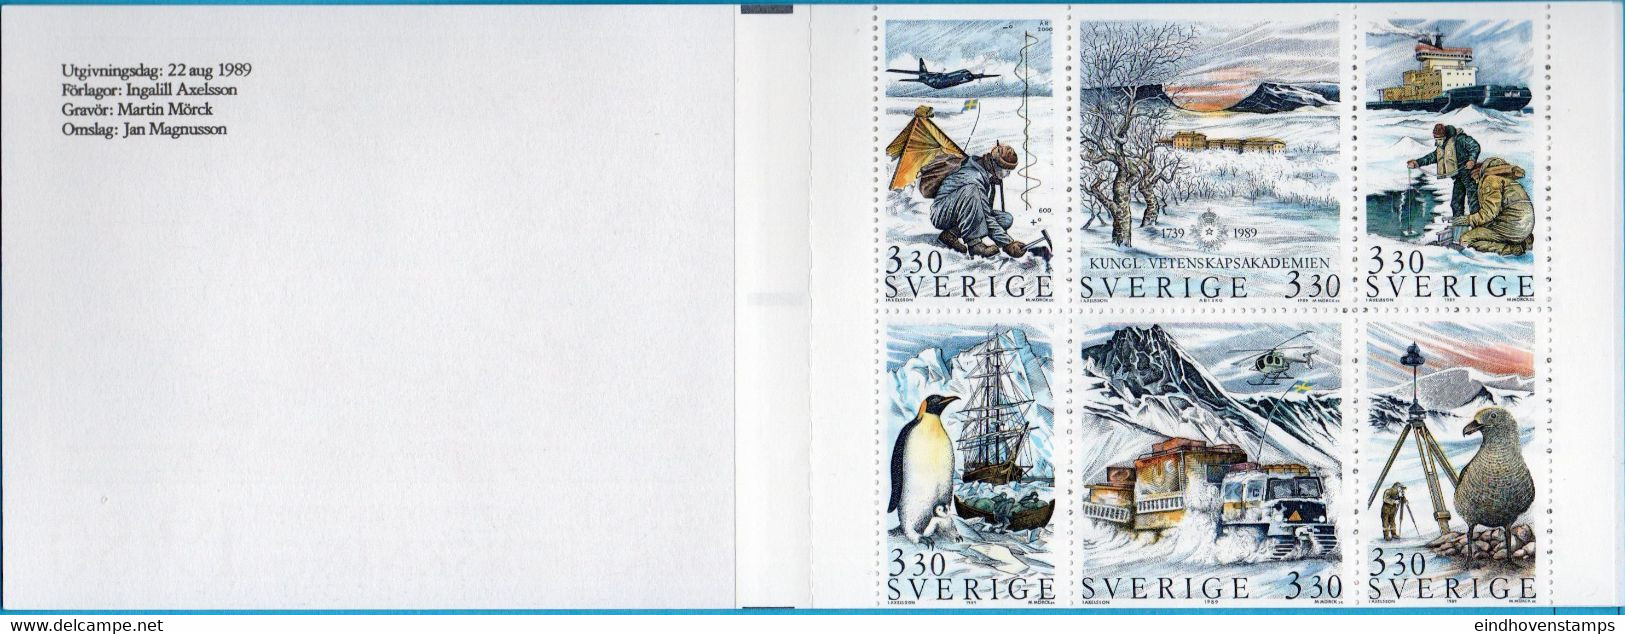 Sweden Sverige 1989 Stamp Booklet Polar Research Cancelled Academy Of Science MNH 89M141 - Forschungsprogramme